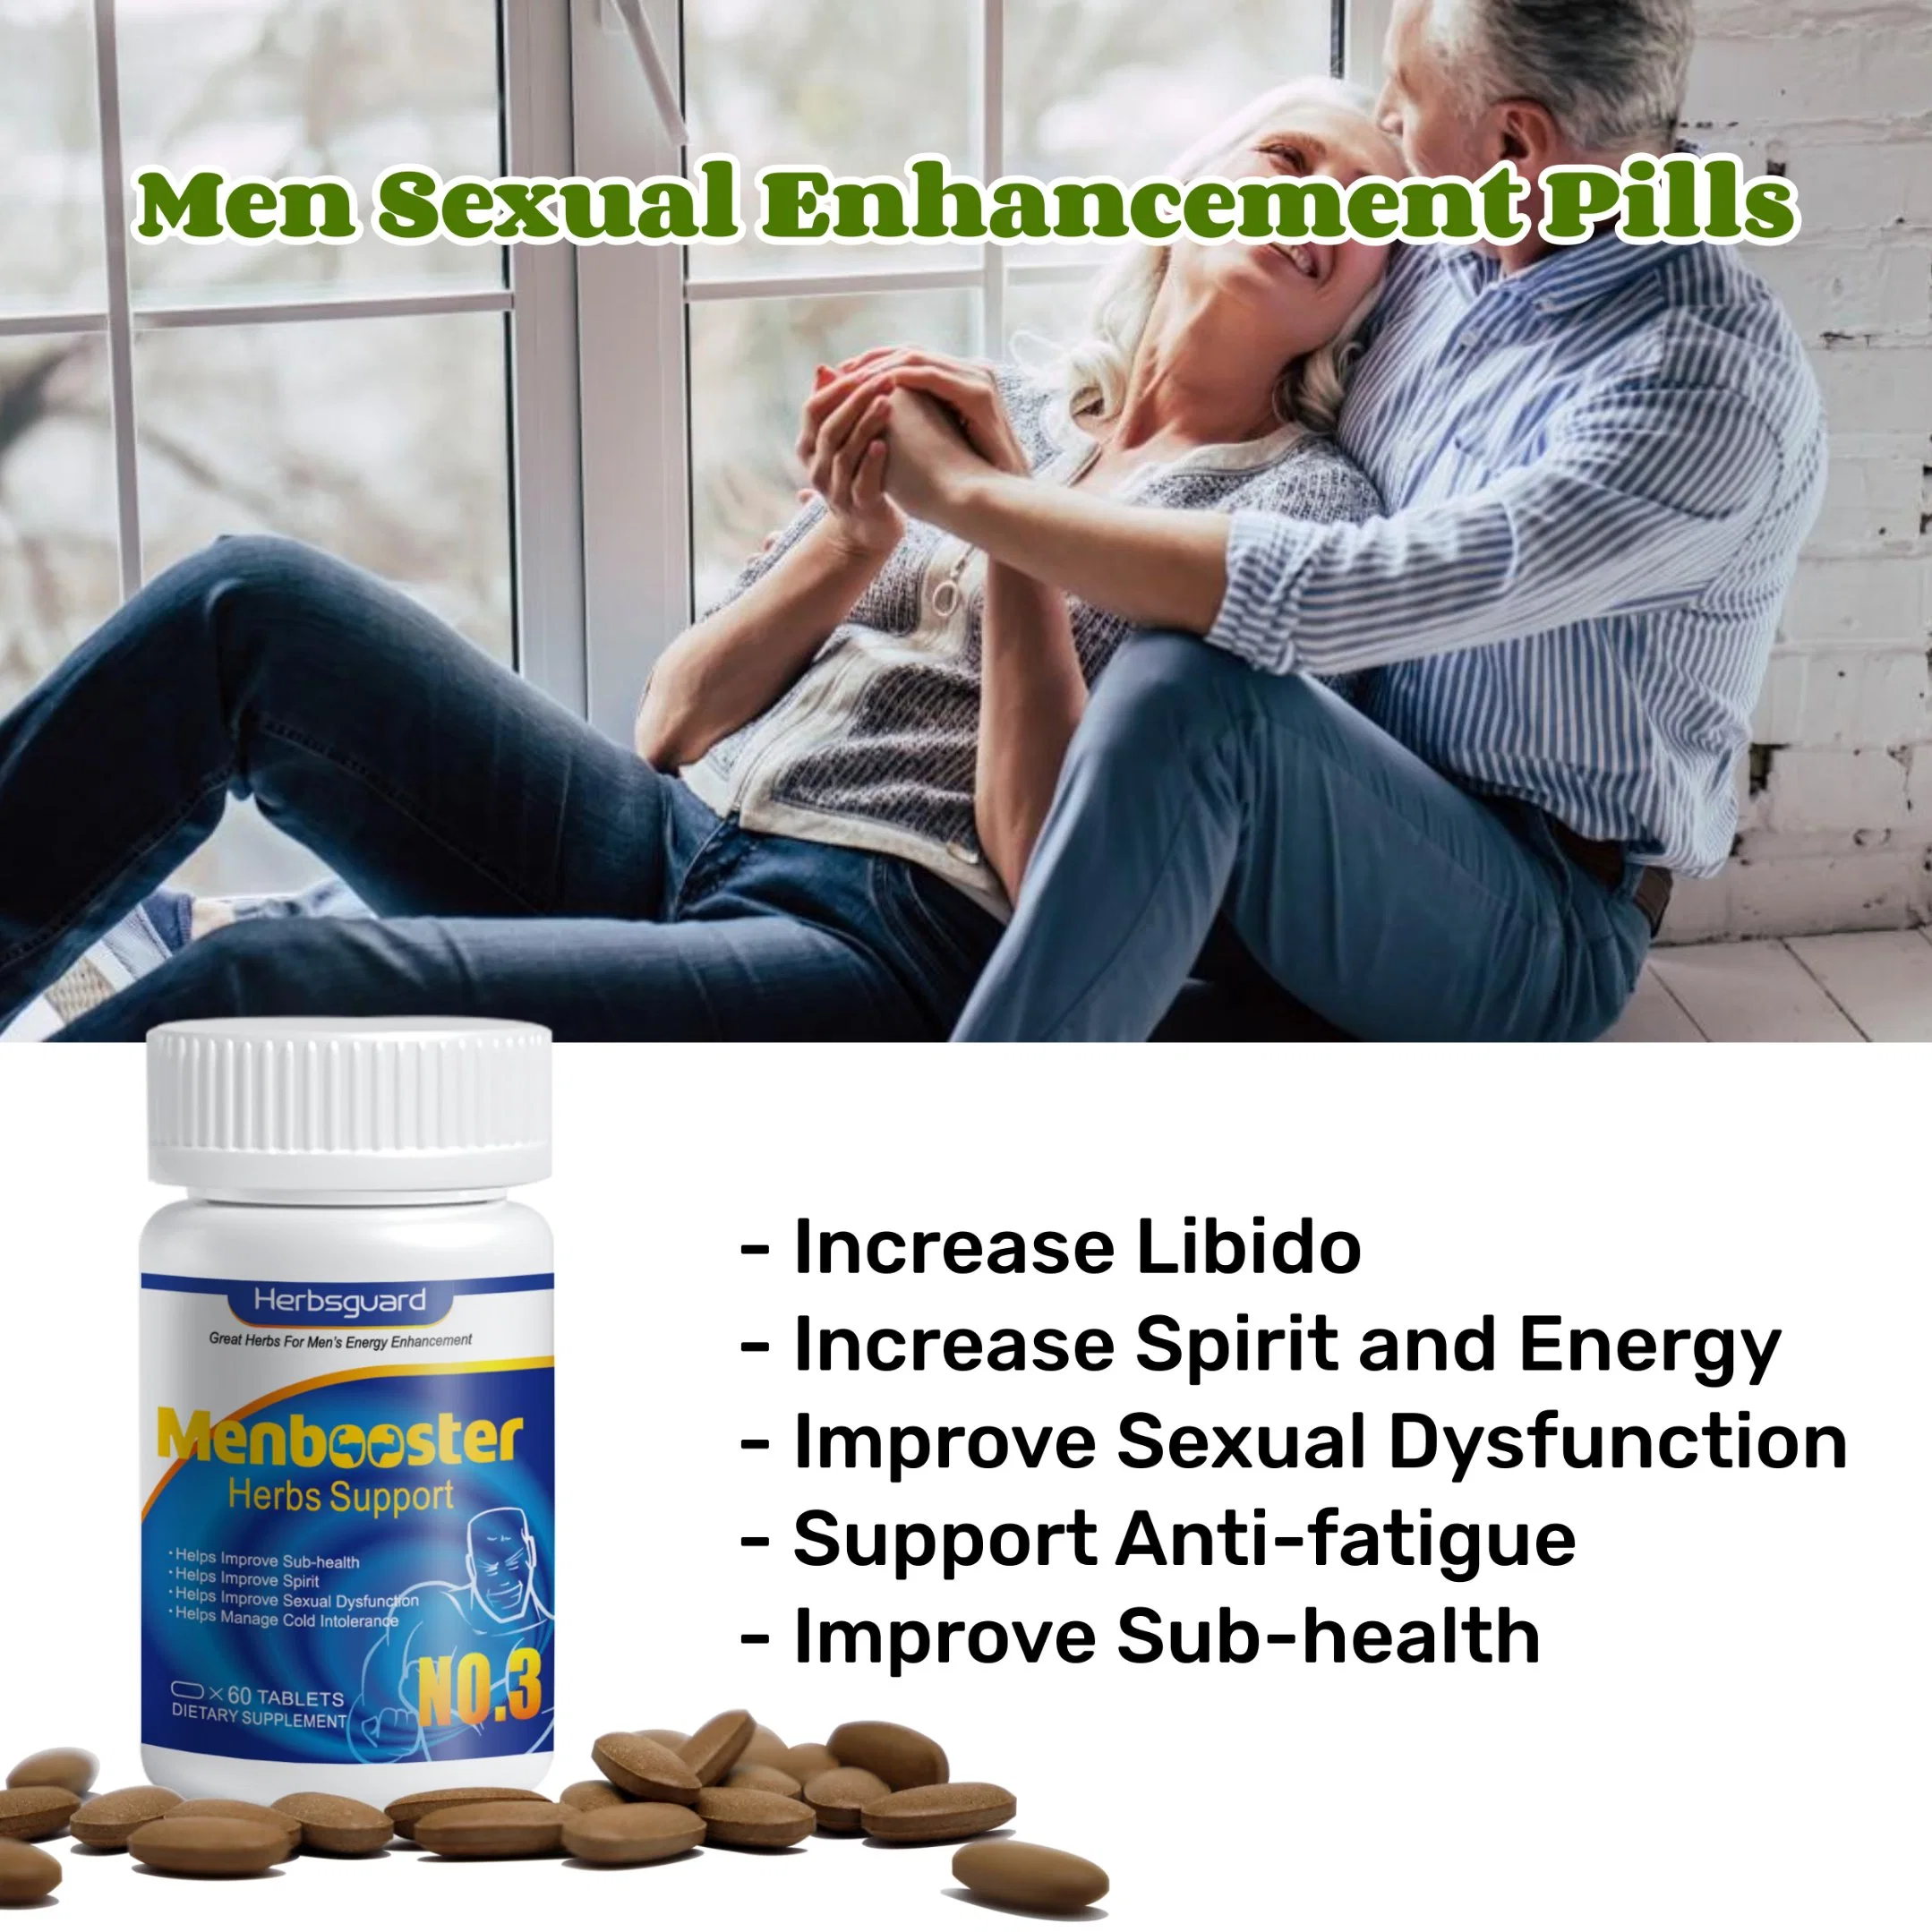 Strong Power Men Male Enhanc Ement Pills Organic Natural Herbal Extract Pills Supports Stamina & Energy